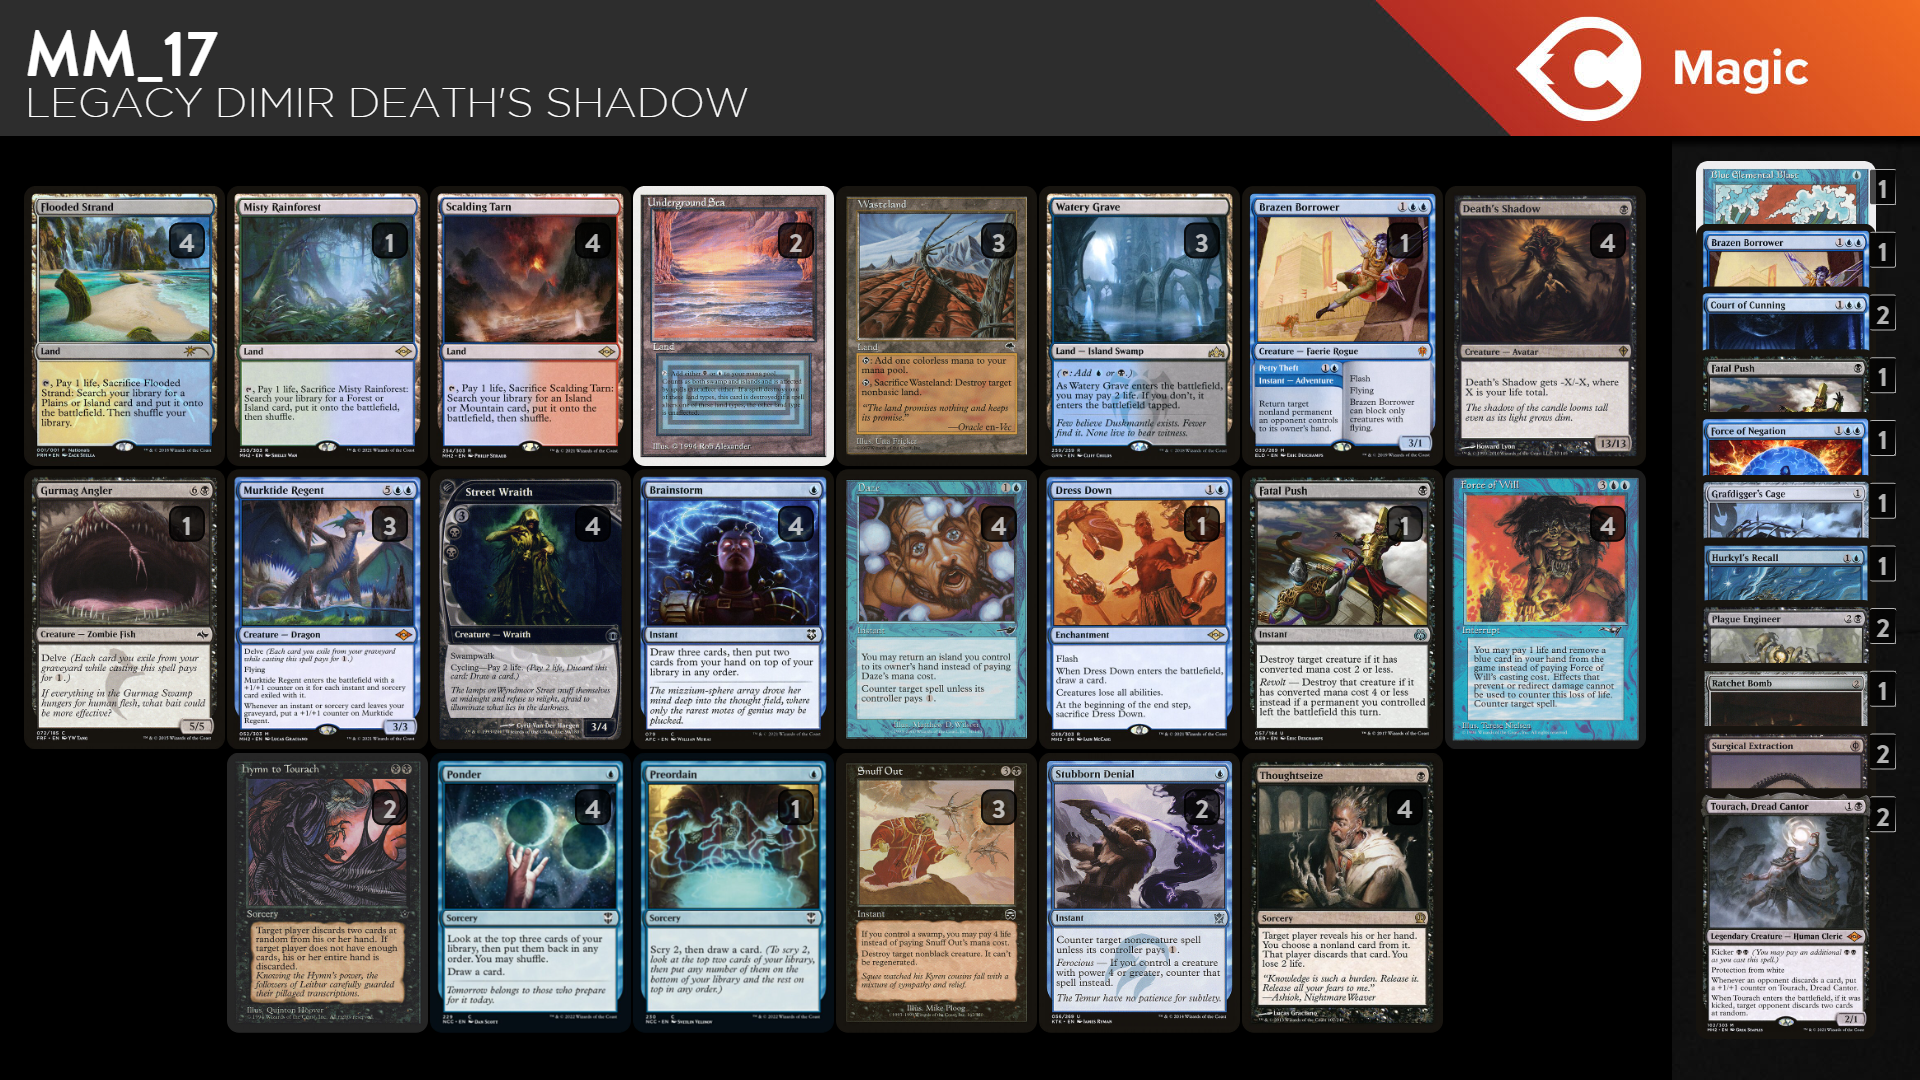 Closing Time: An Early Valda Deck Guide - The Rathe Times